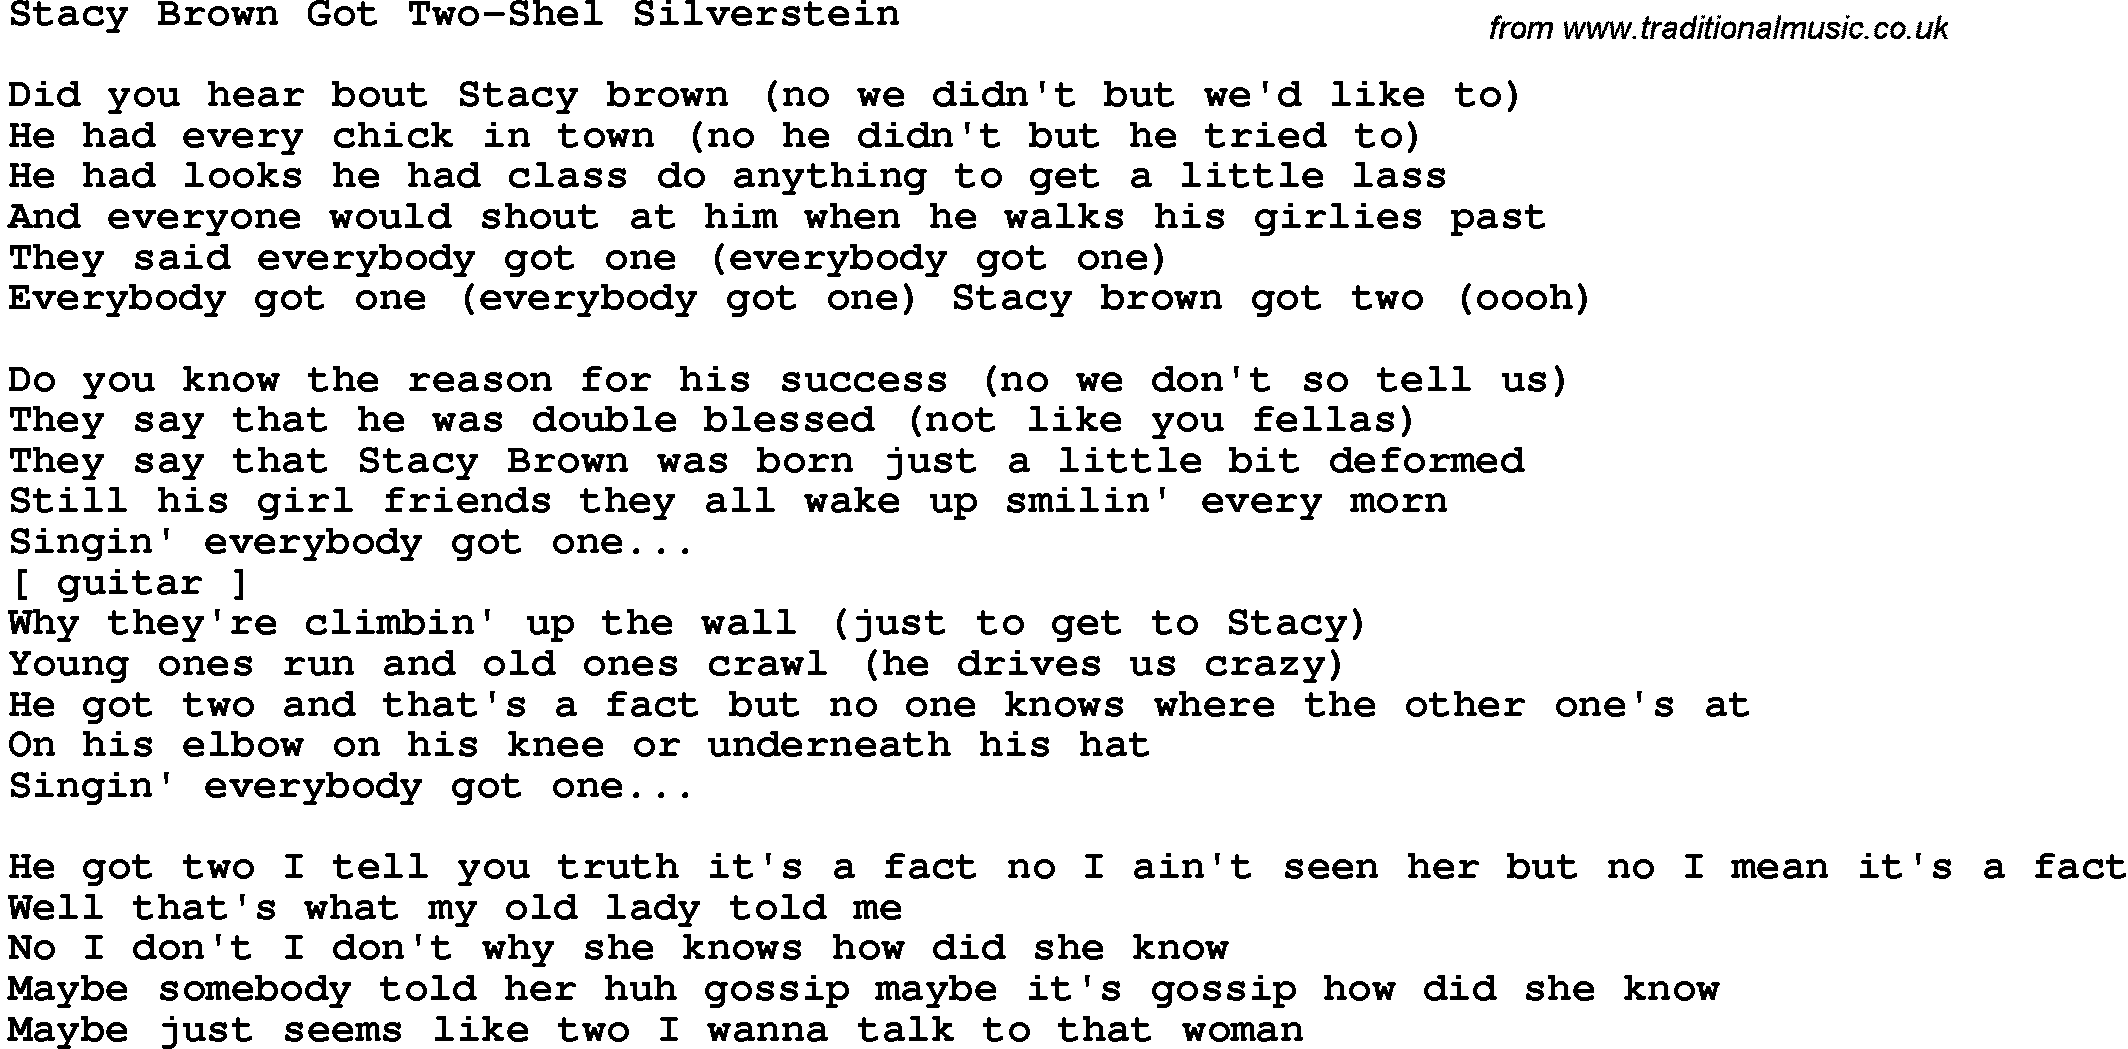 Novelty song: Stacy Brown Got Two-Shel Silverstein lyrics